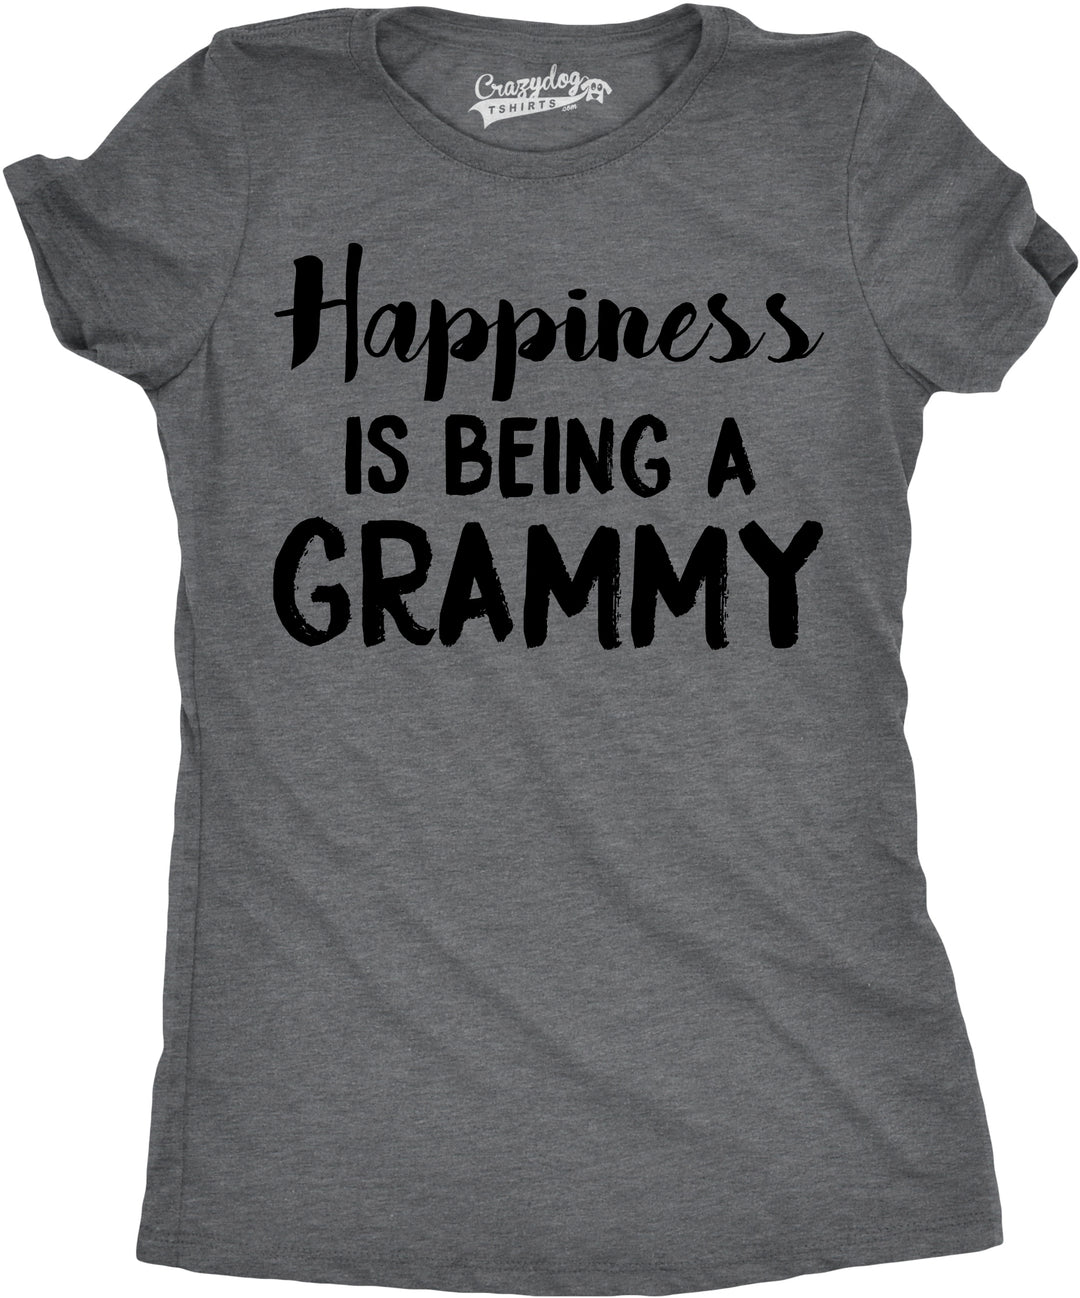 Funny Dark Heather Grey Happiness Is Being A Grammy Womens T Shirt Nerdy Mother's Day Grandmother Tee